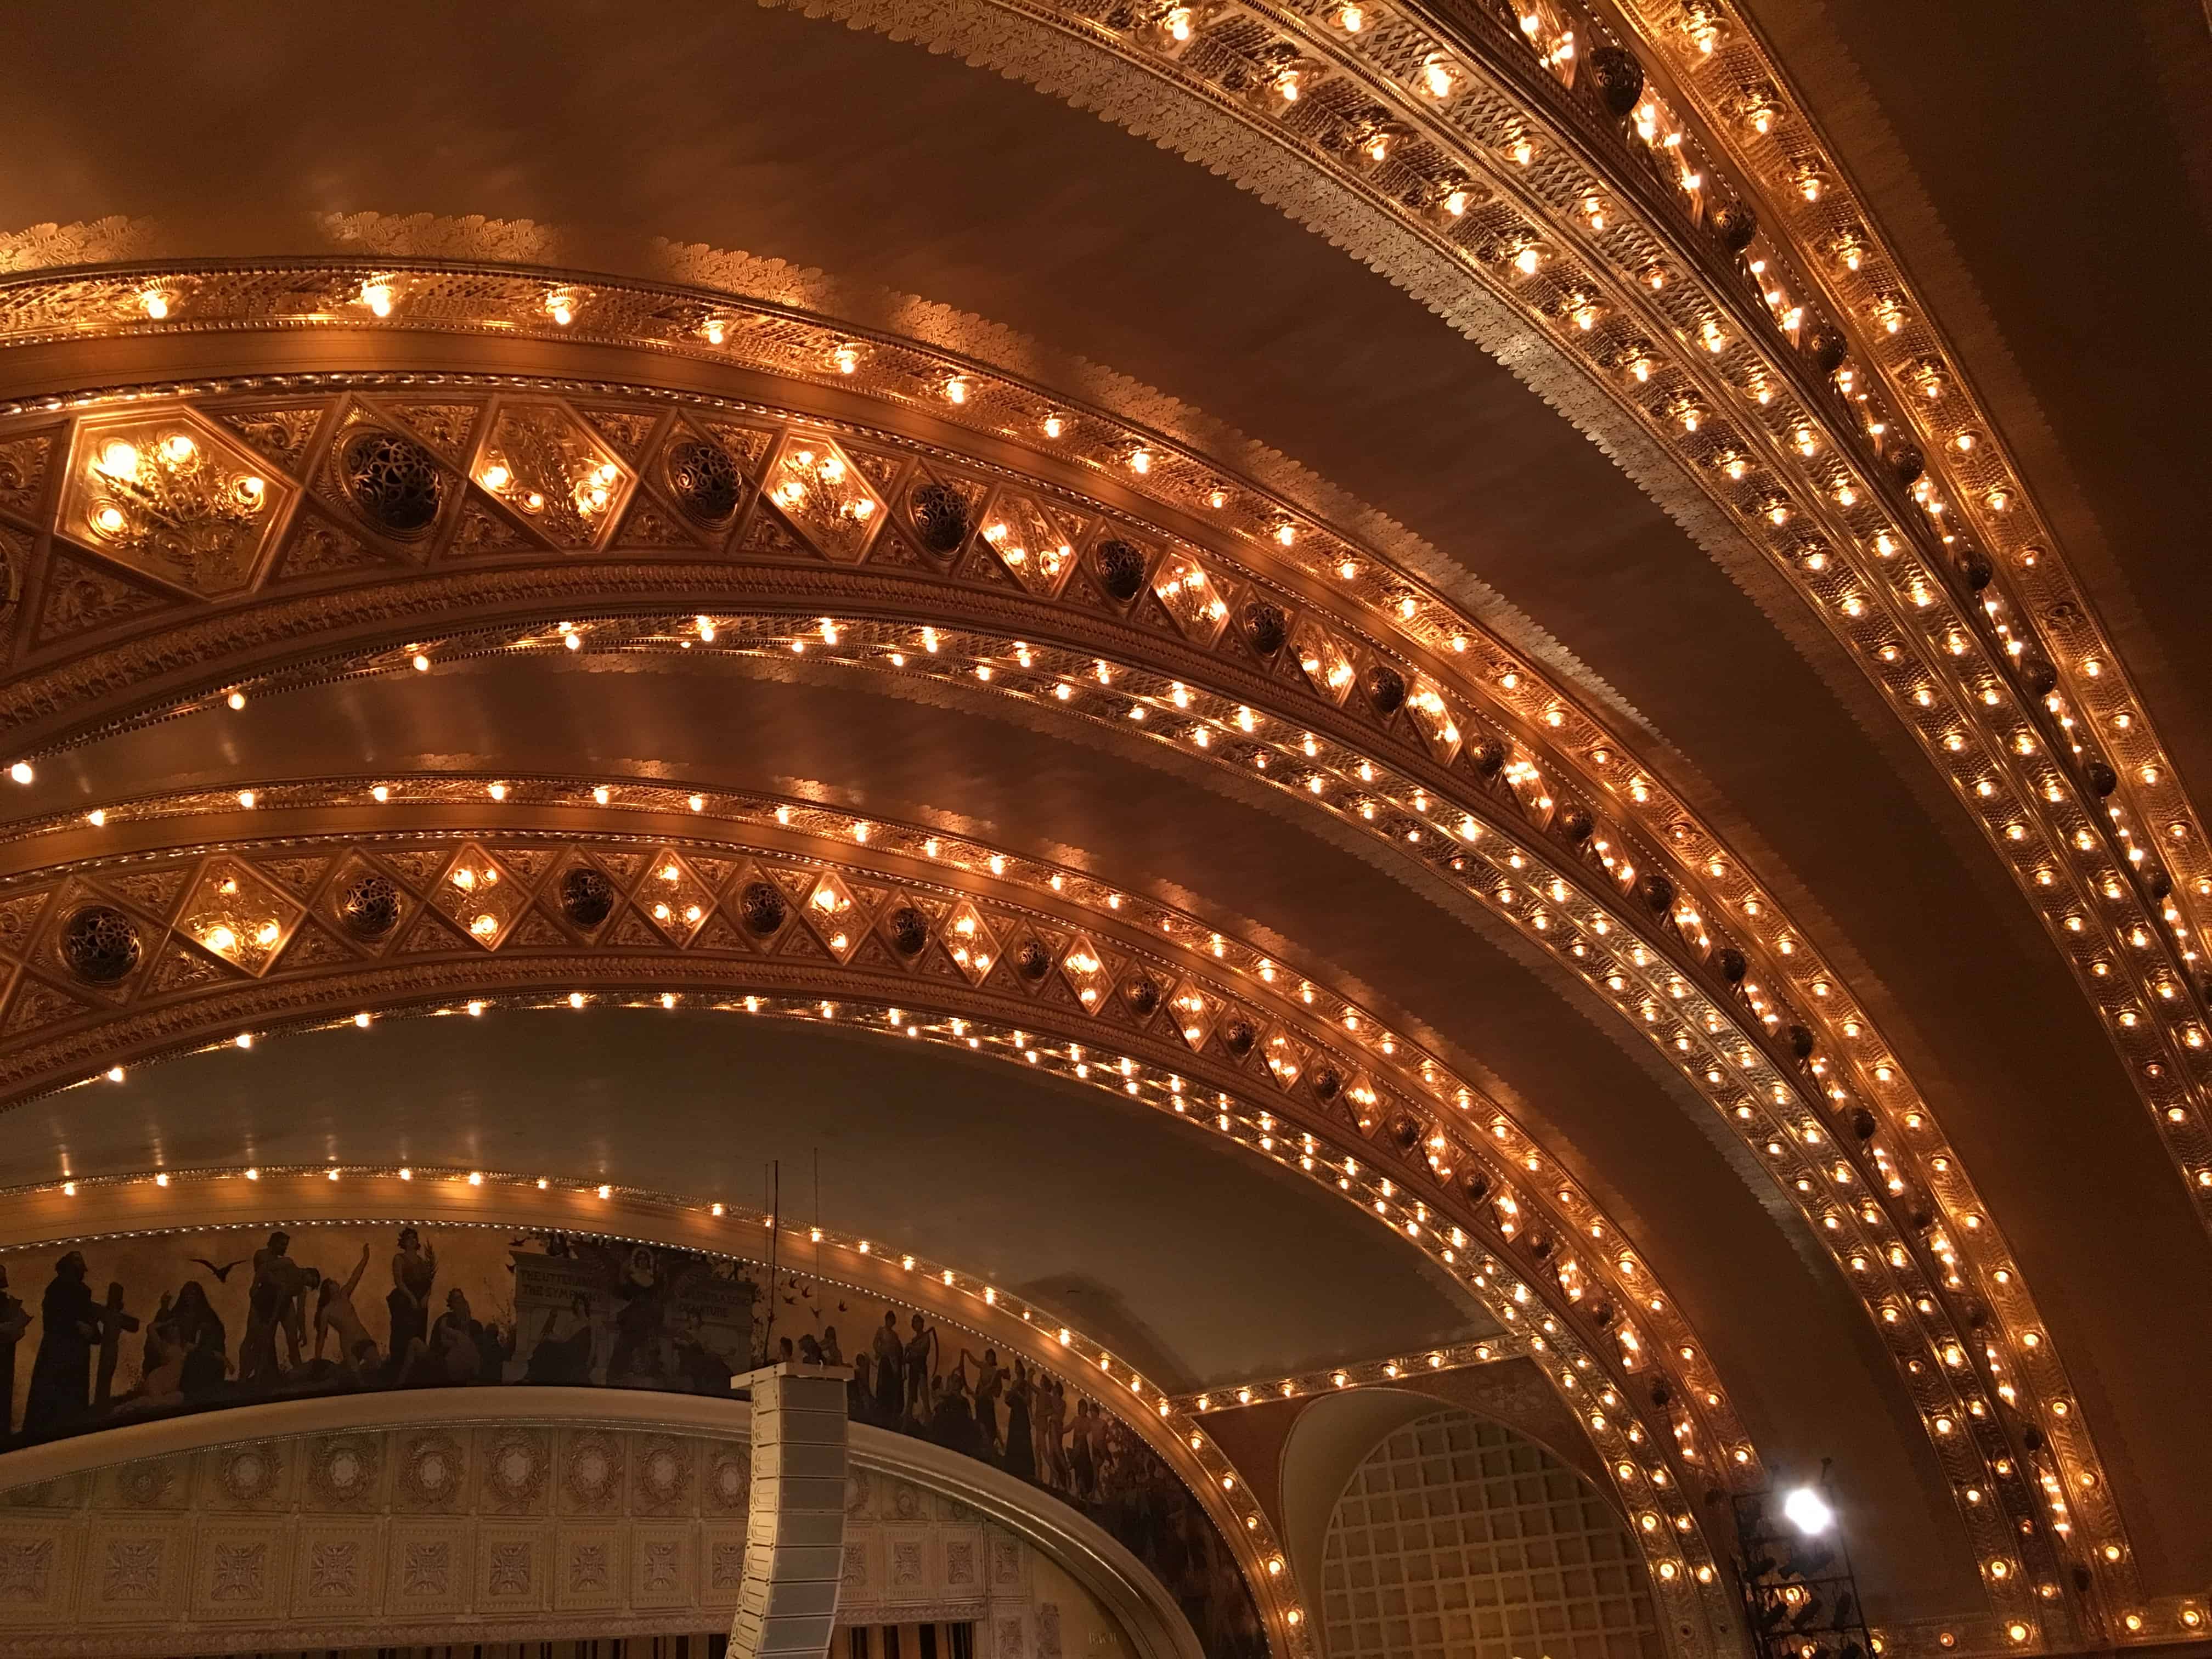 Lighting and air conditioning vents in the Auditorium Theatre in Chicago, Illinois